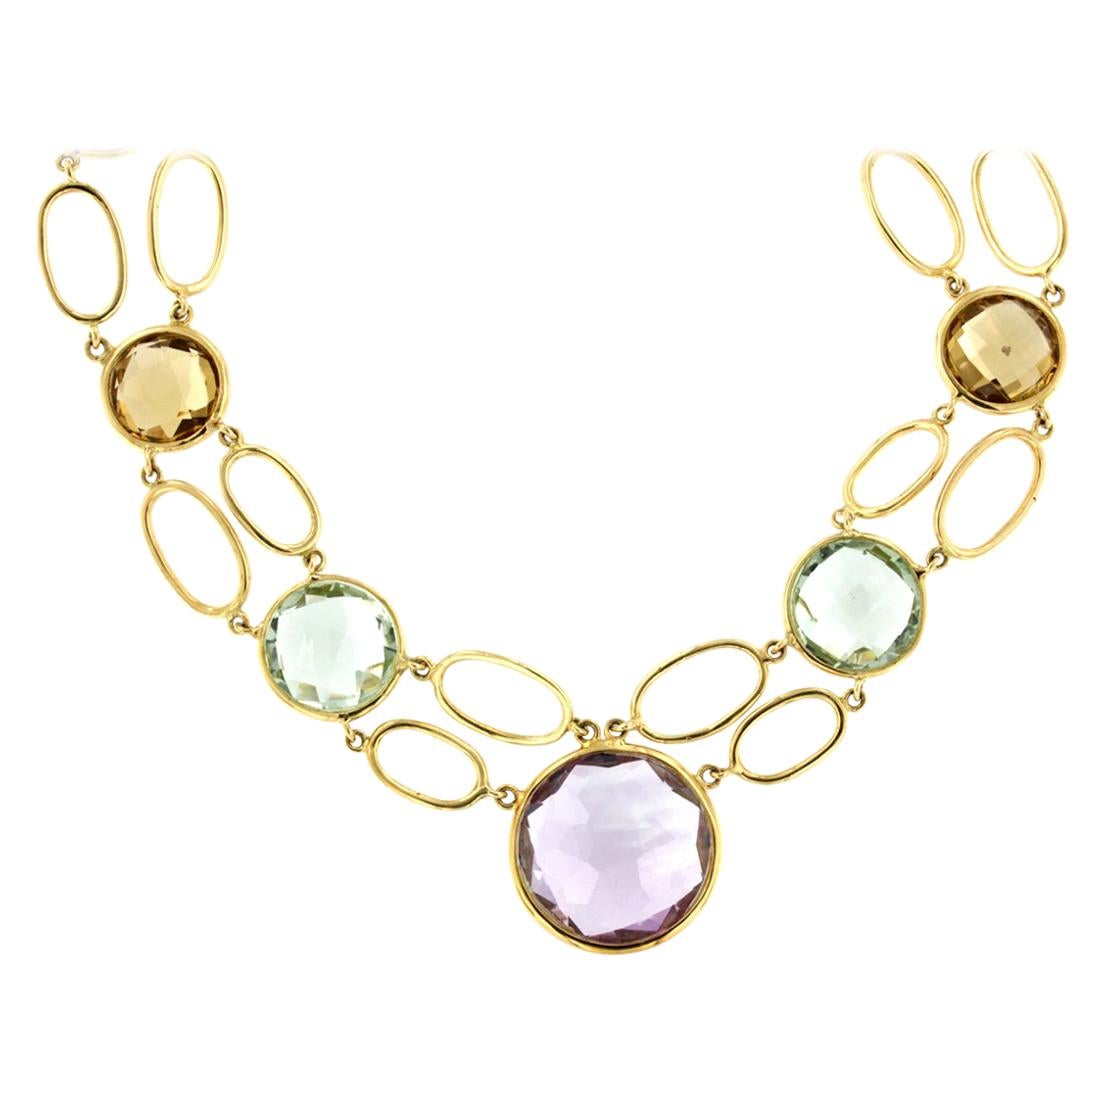 18k Yellow Gold with Colored Stones Bracelet and Necklace Set